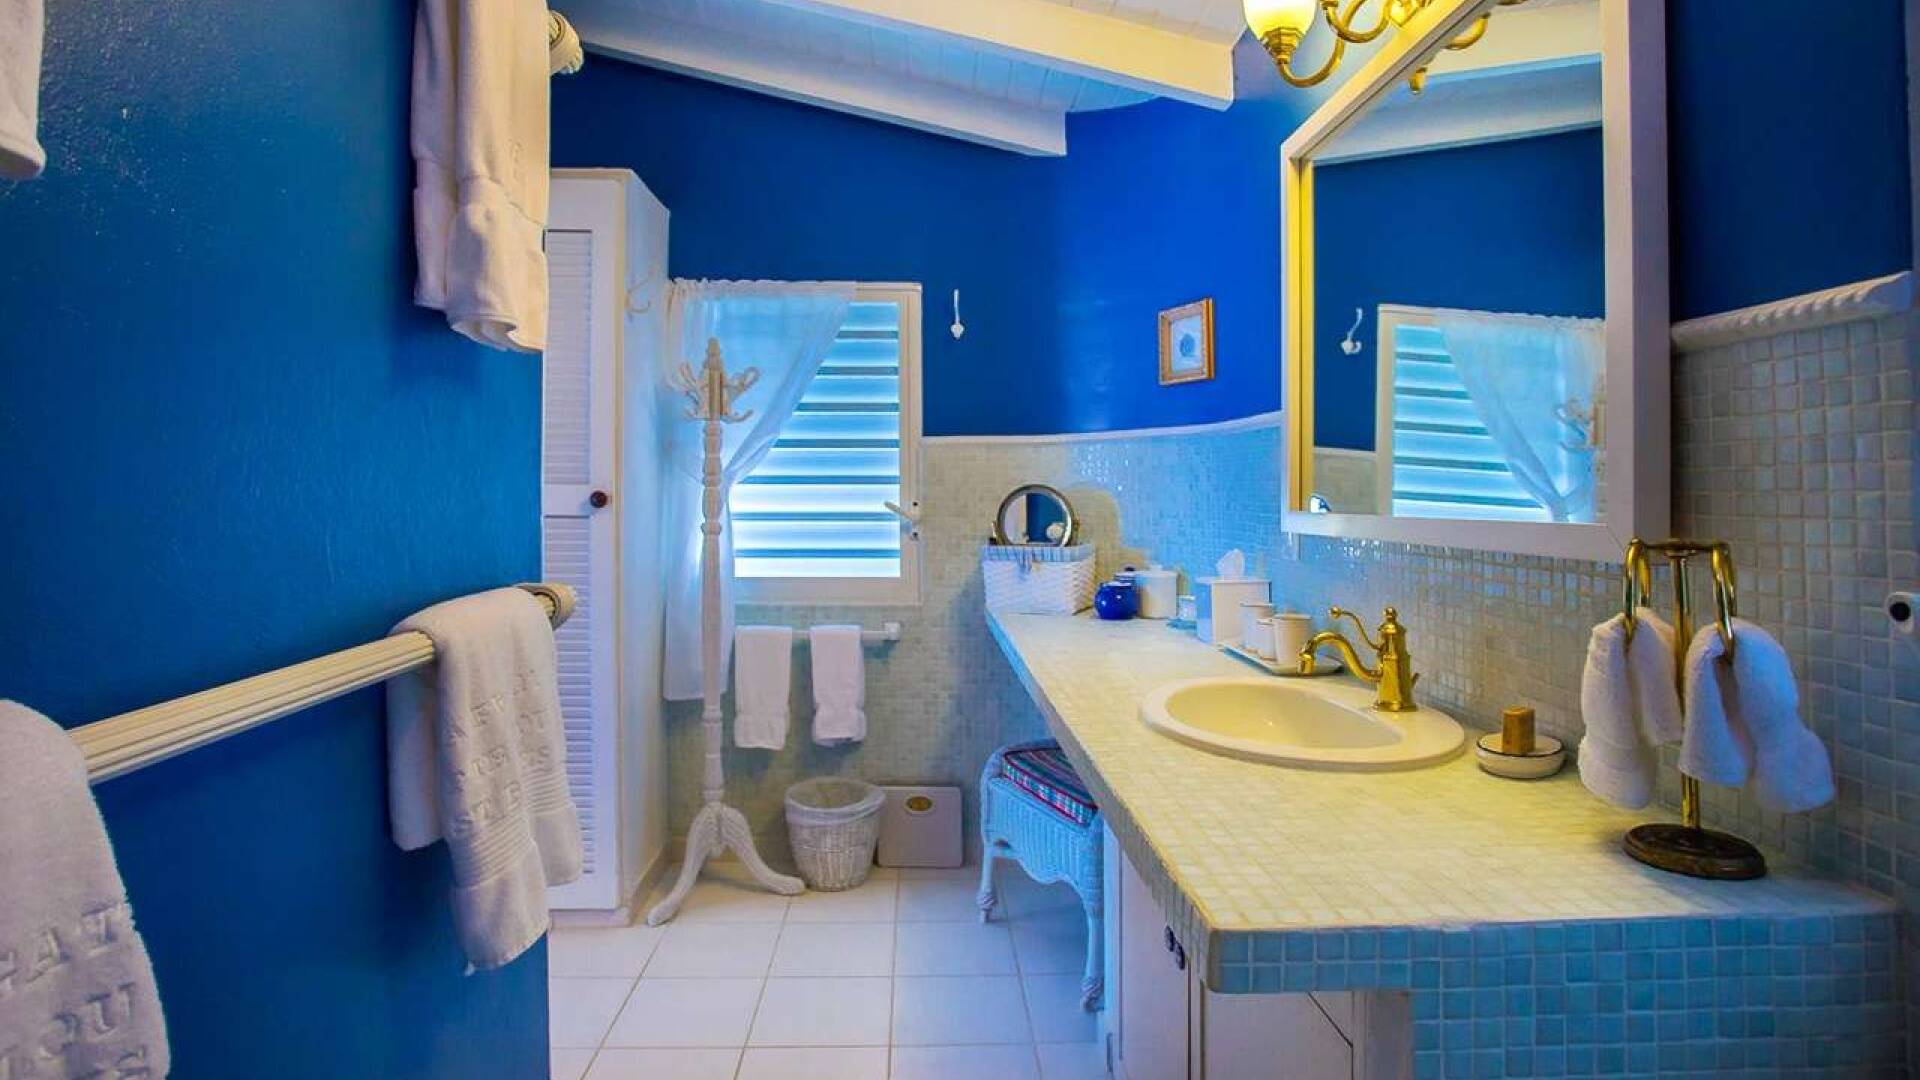 Bathroom at WV FRE, Pointe Milou, St. Barthelemy